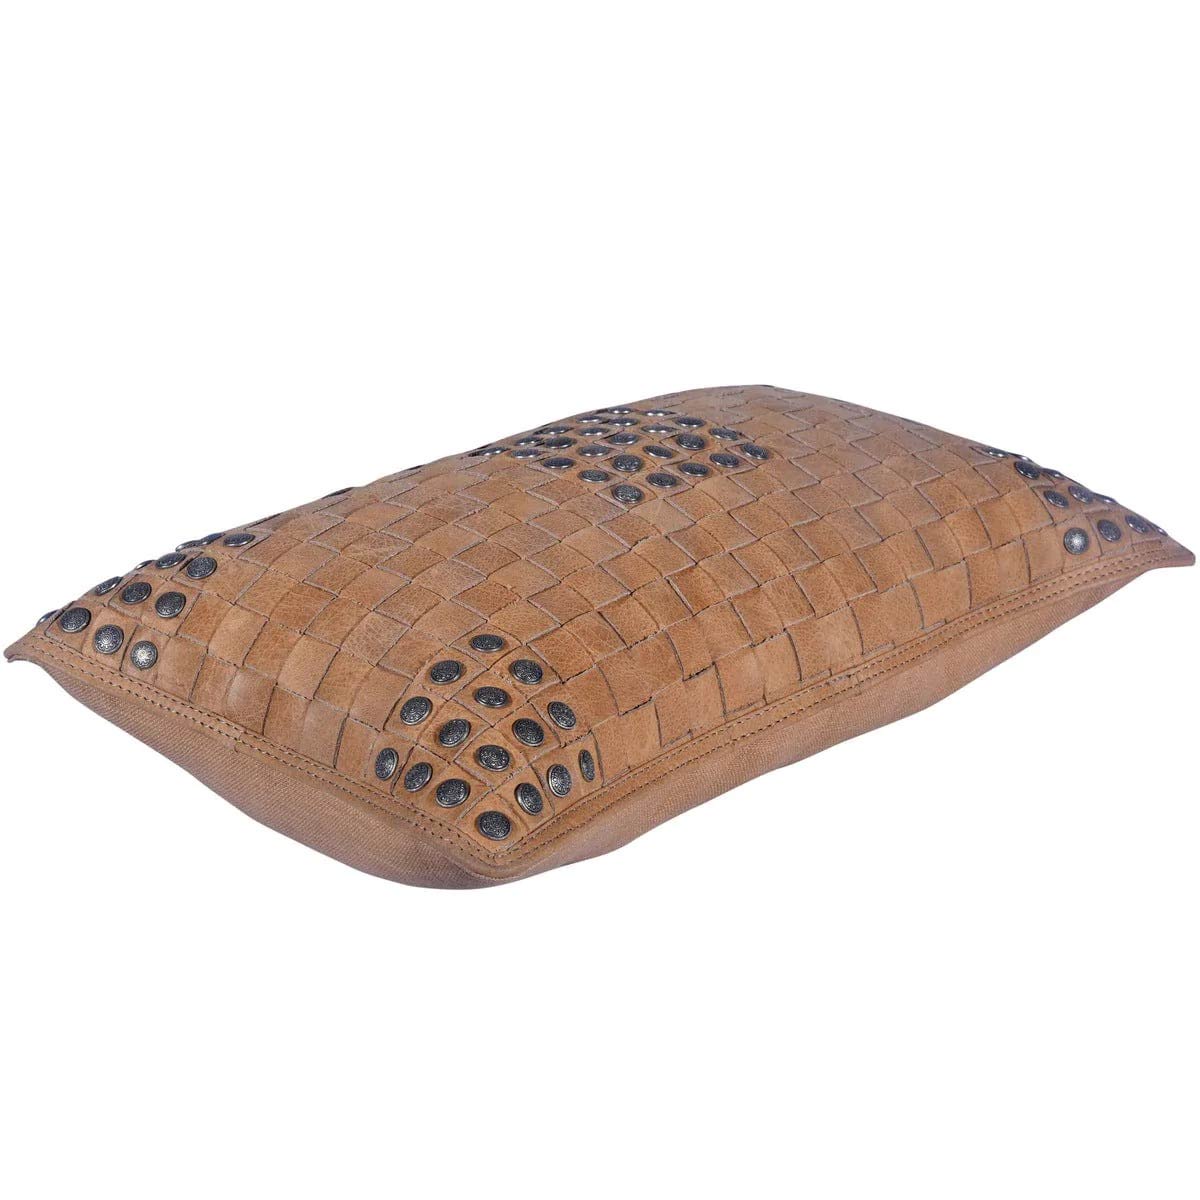 Soft Tan Basket Weave Genuine Leather Pillow with stud accents  Edit alt text